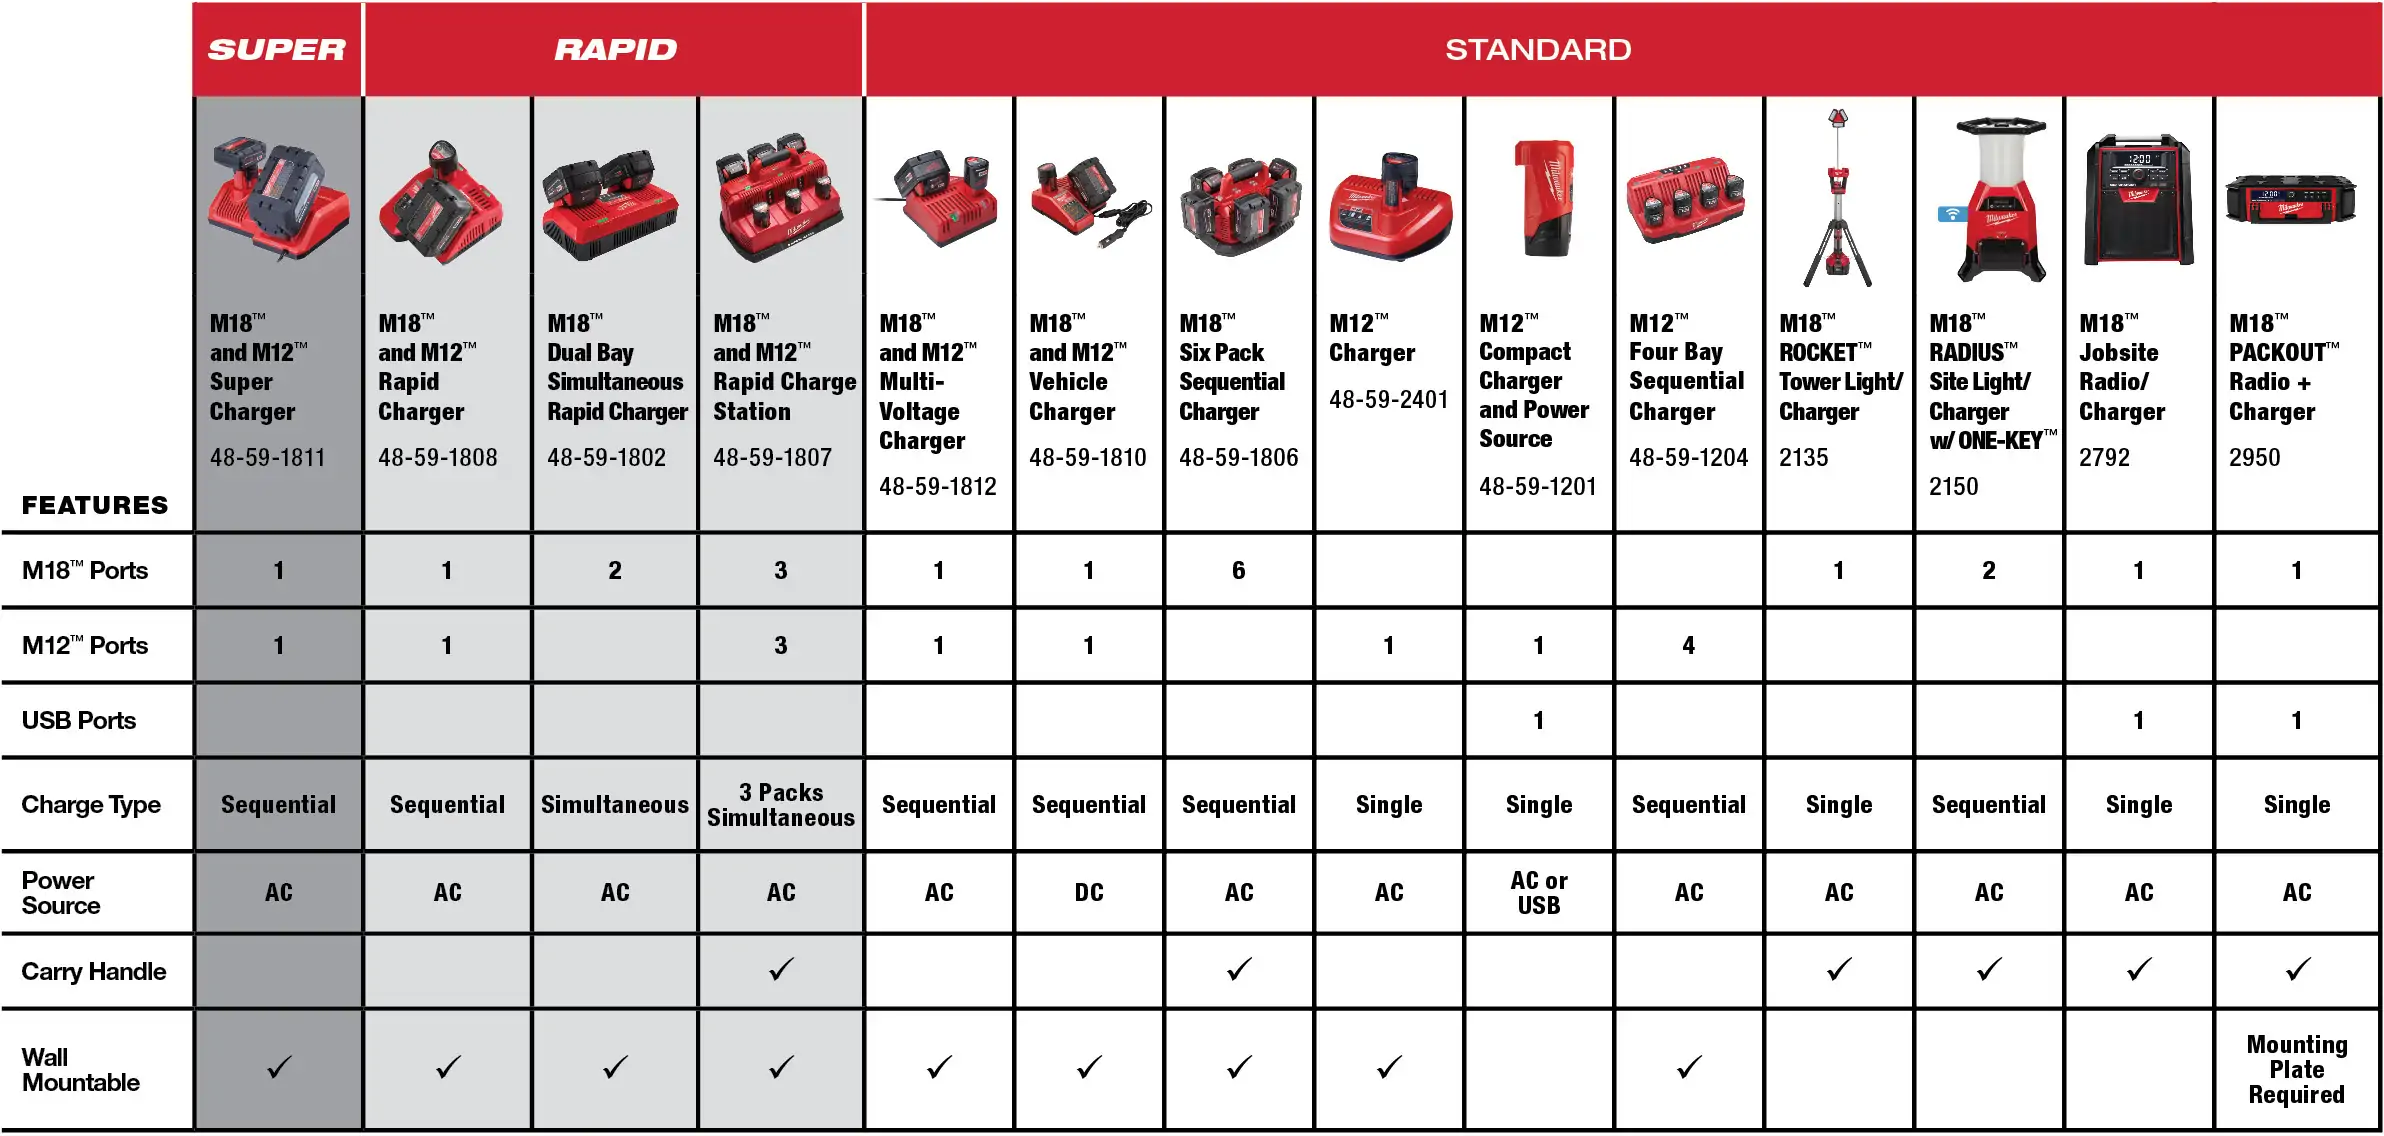 Batteries and Charging Solutions Comparison Chart